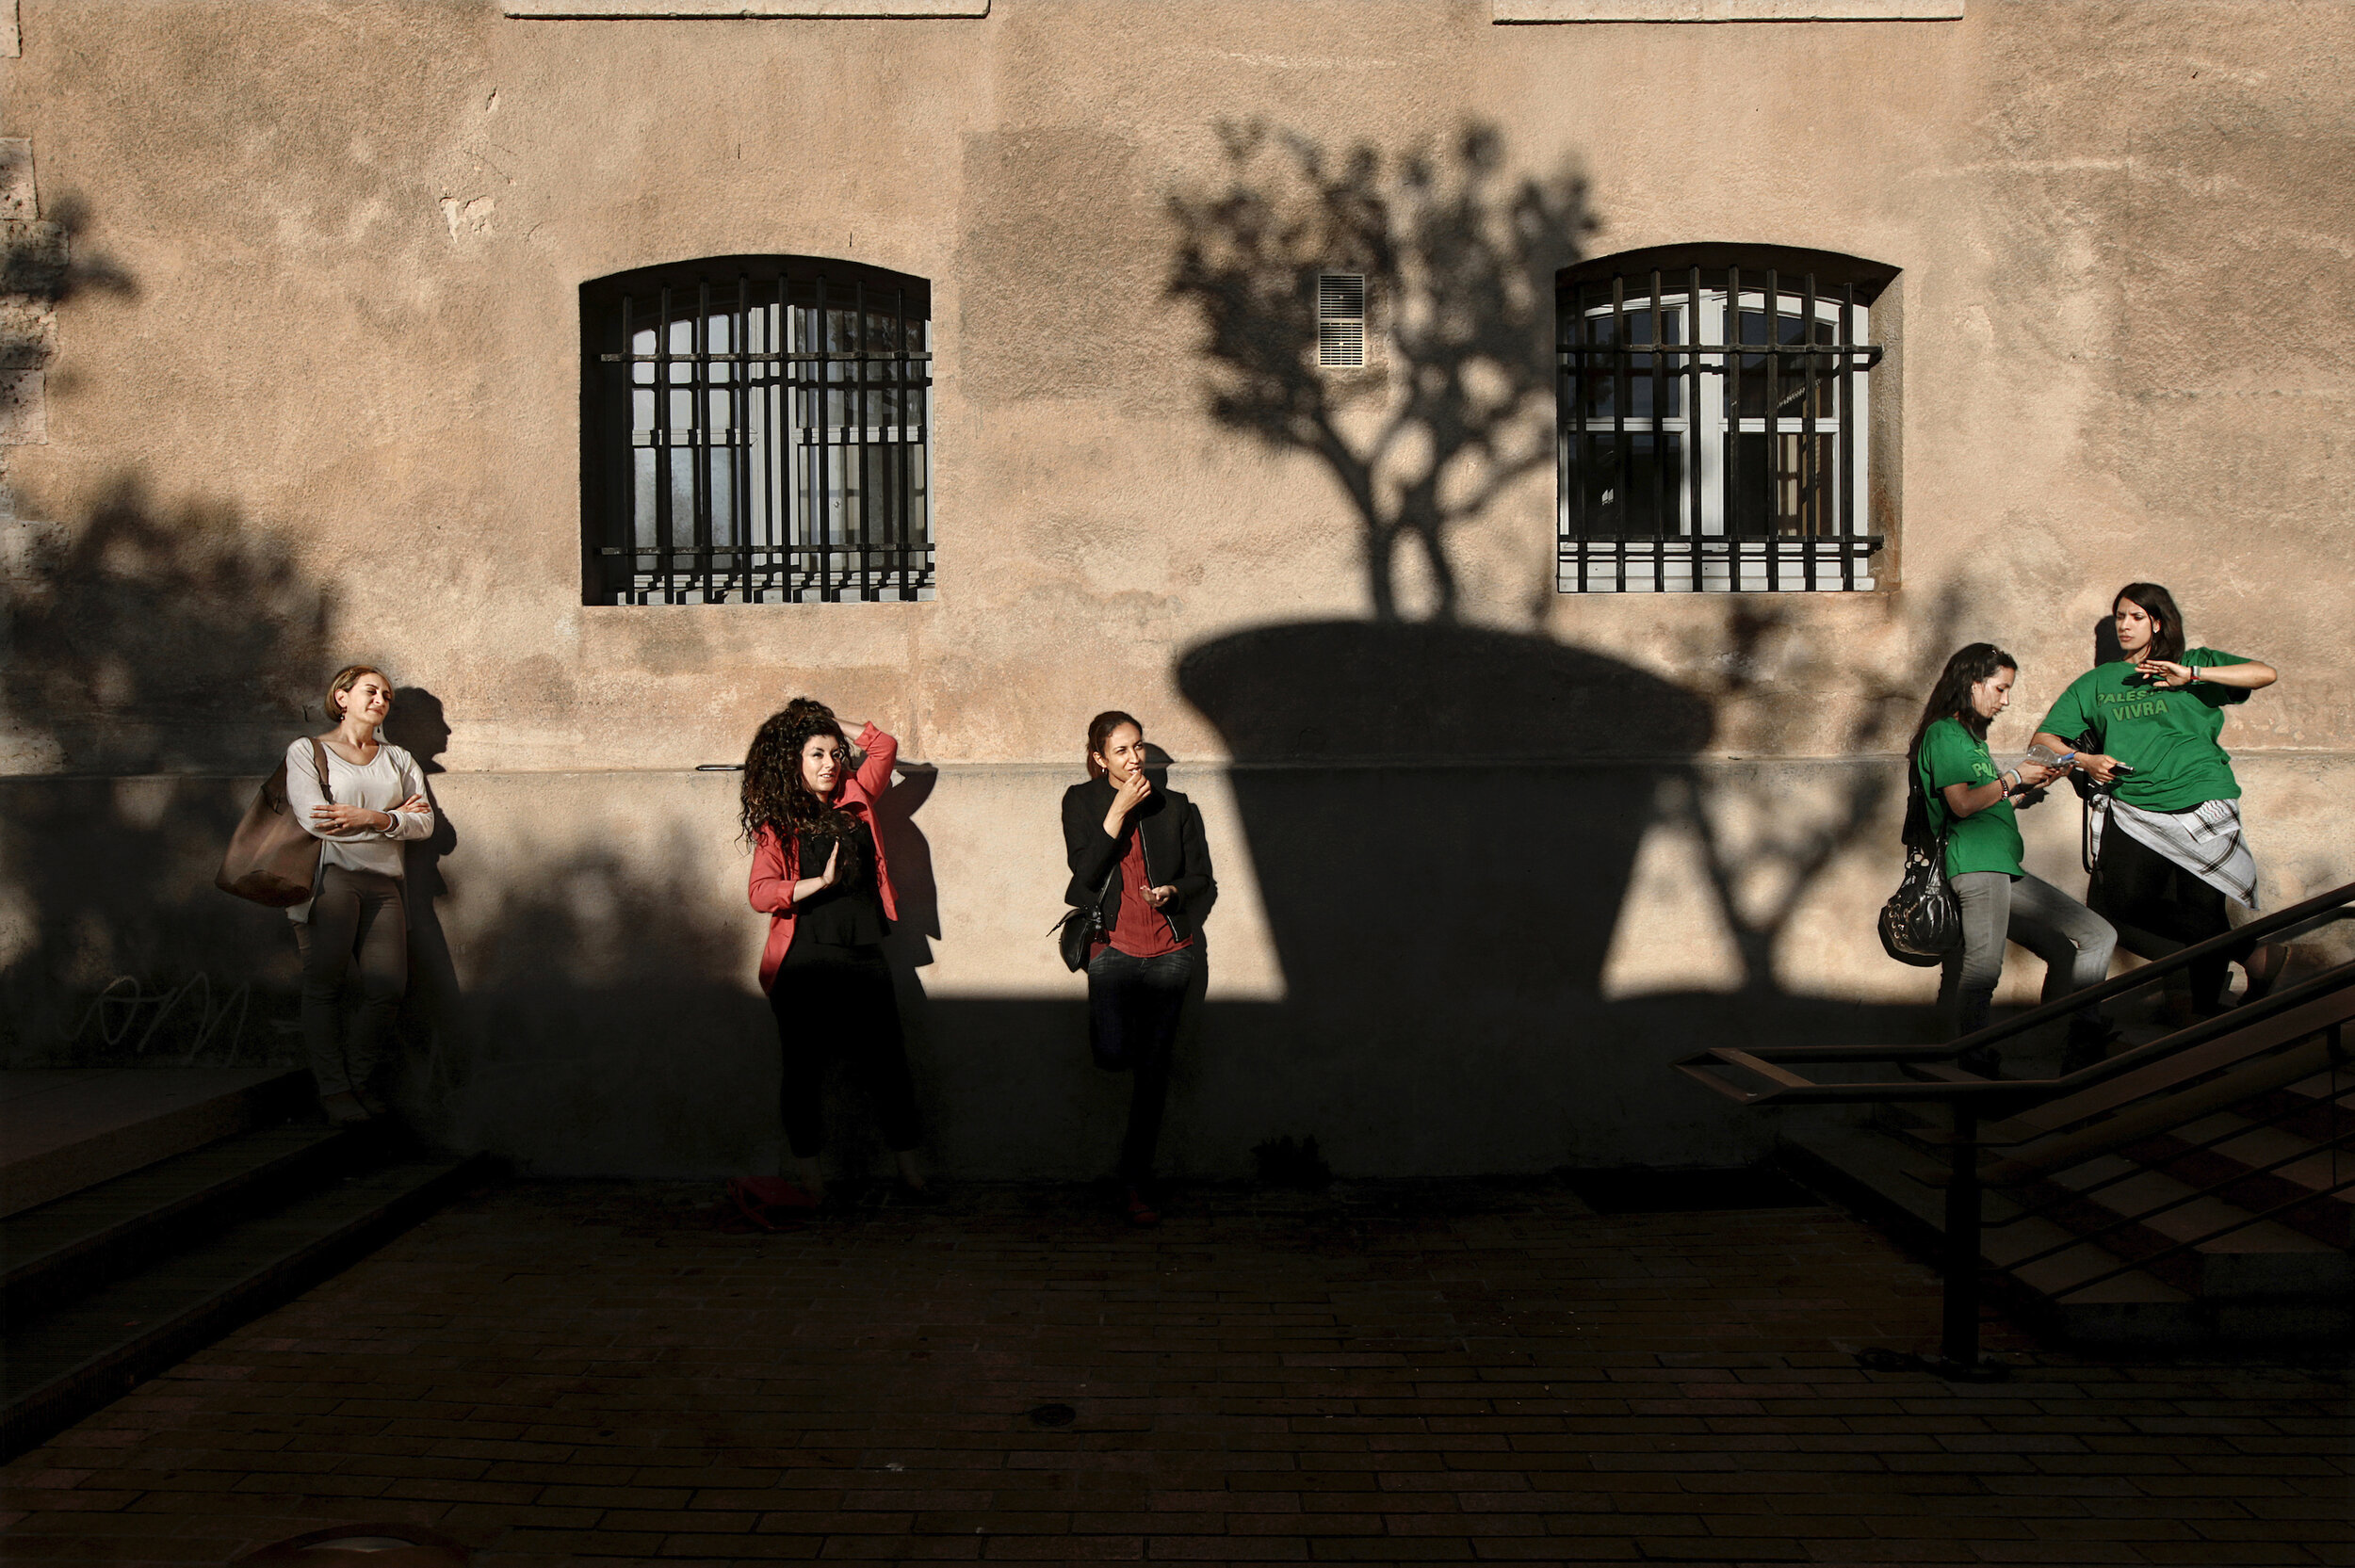   France. Marseille. 2014. Near the Town Hall Square.        